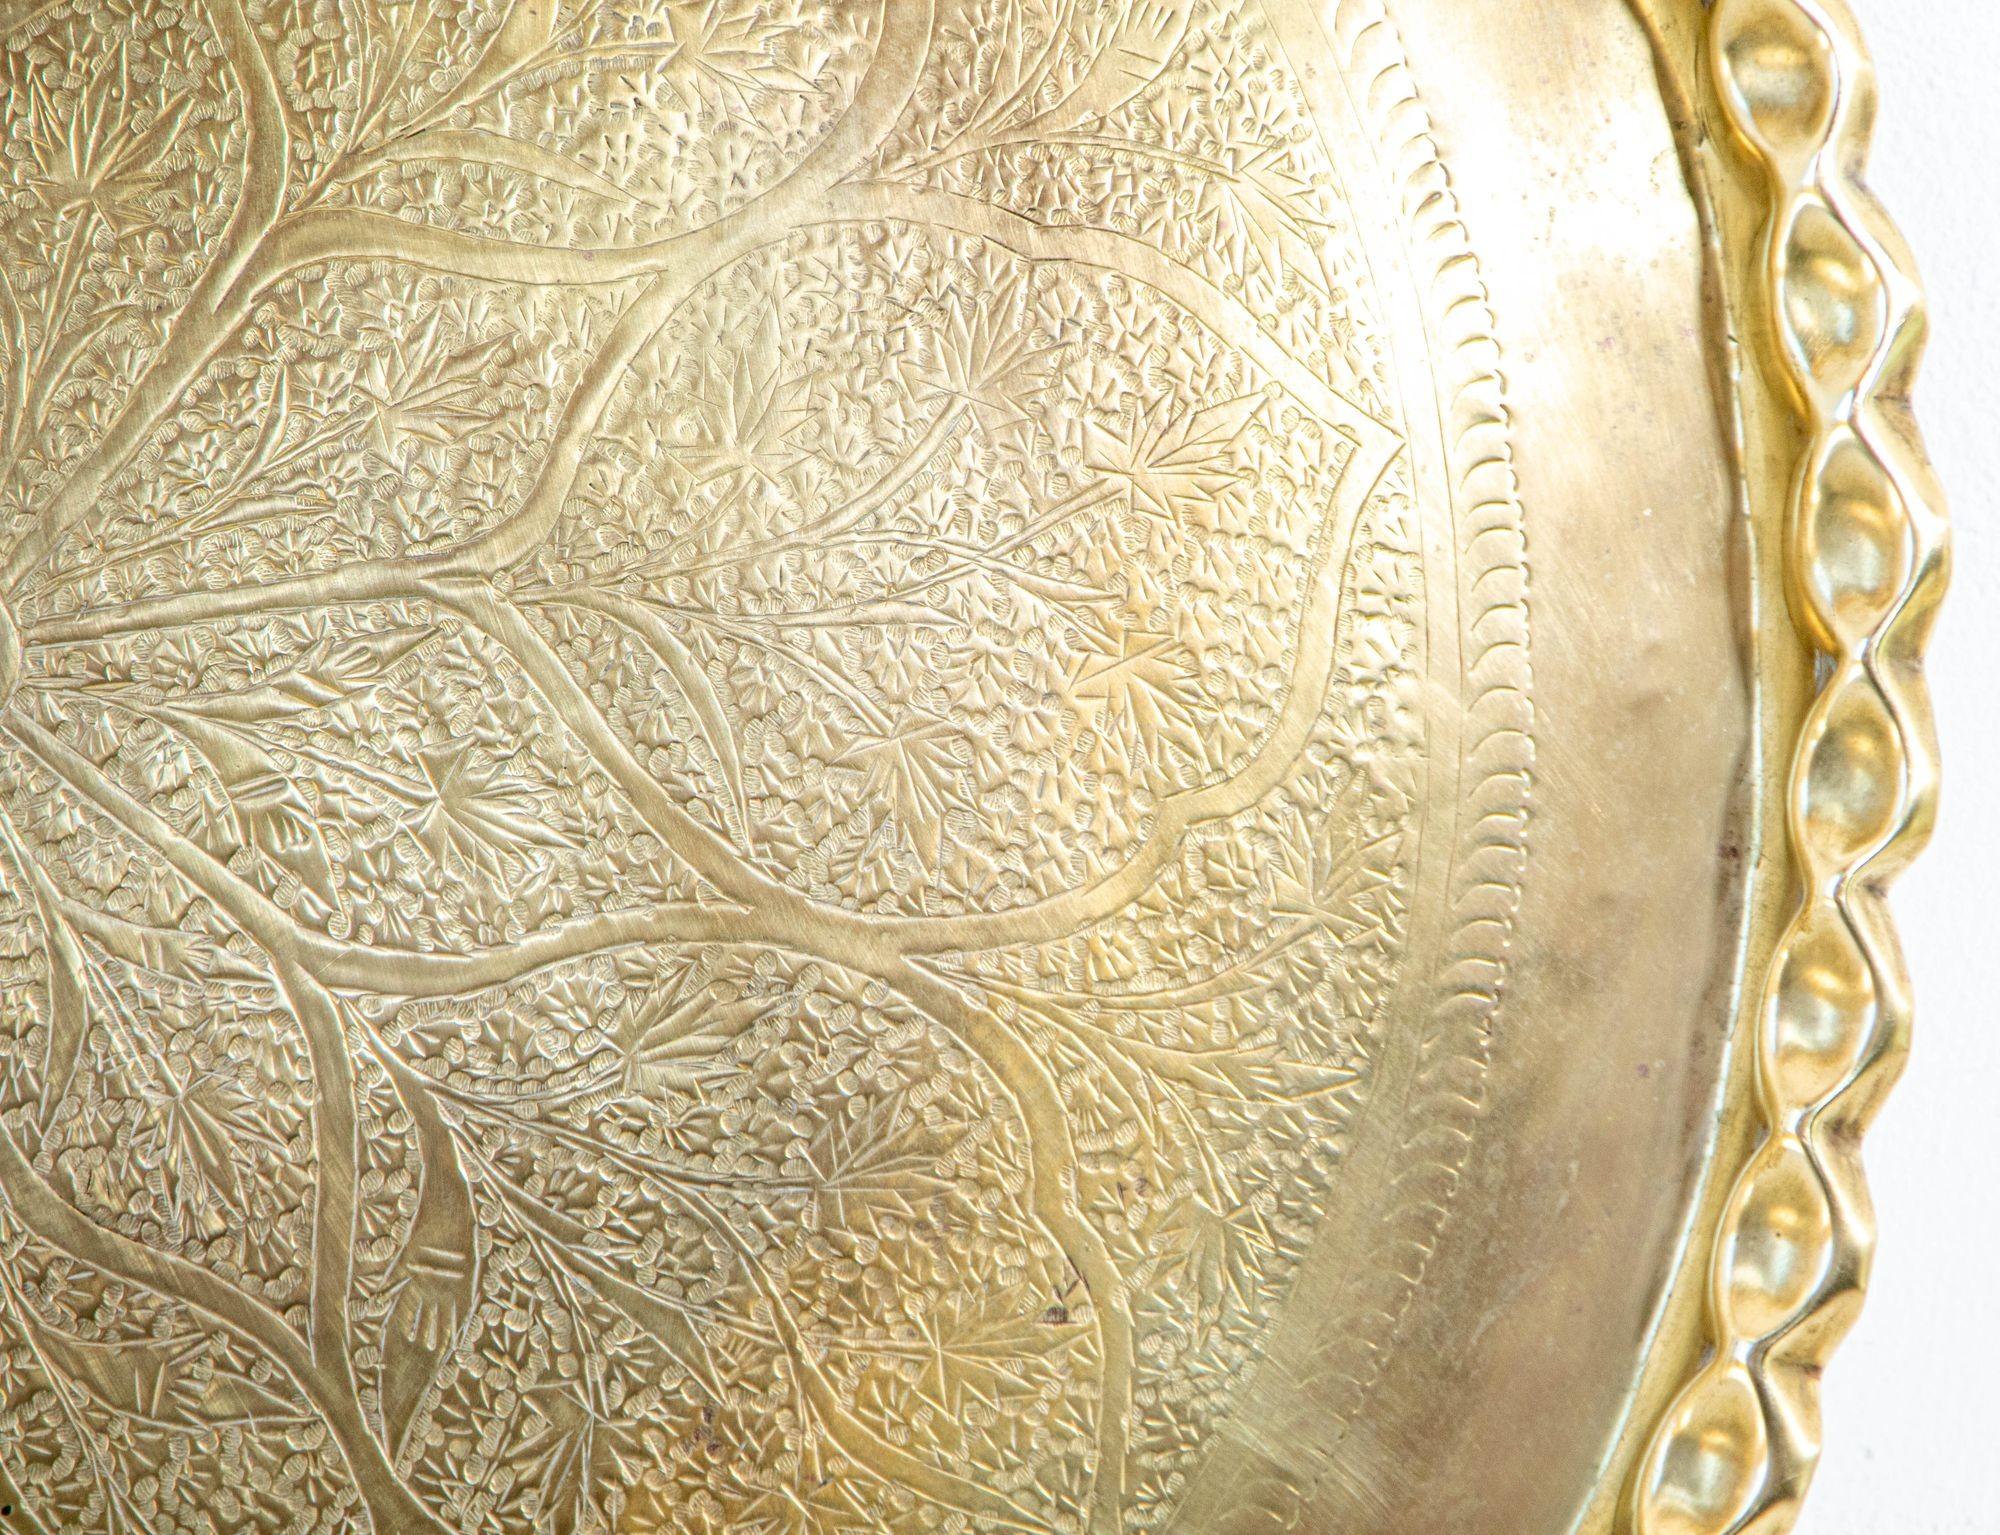 Laiton Asian Mughal Rajasthani Large Round Brass Tray with Crest Edges 30 in. en vente